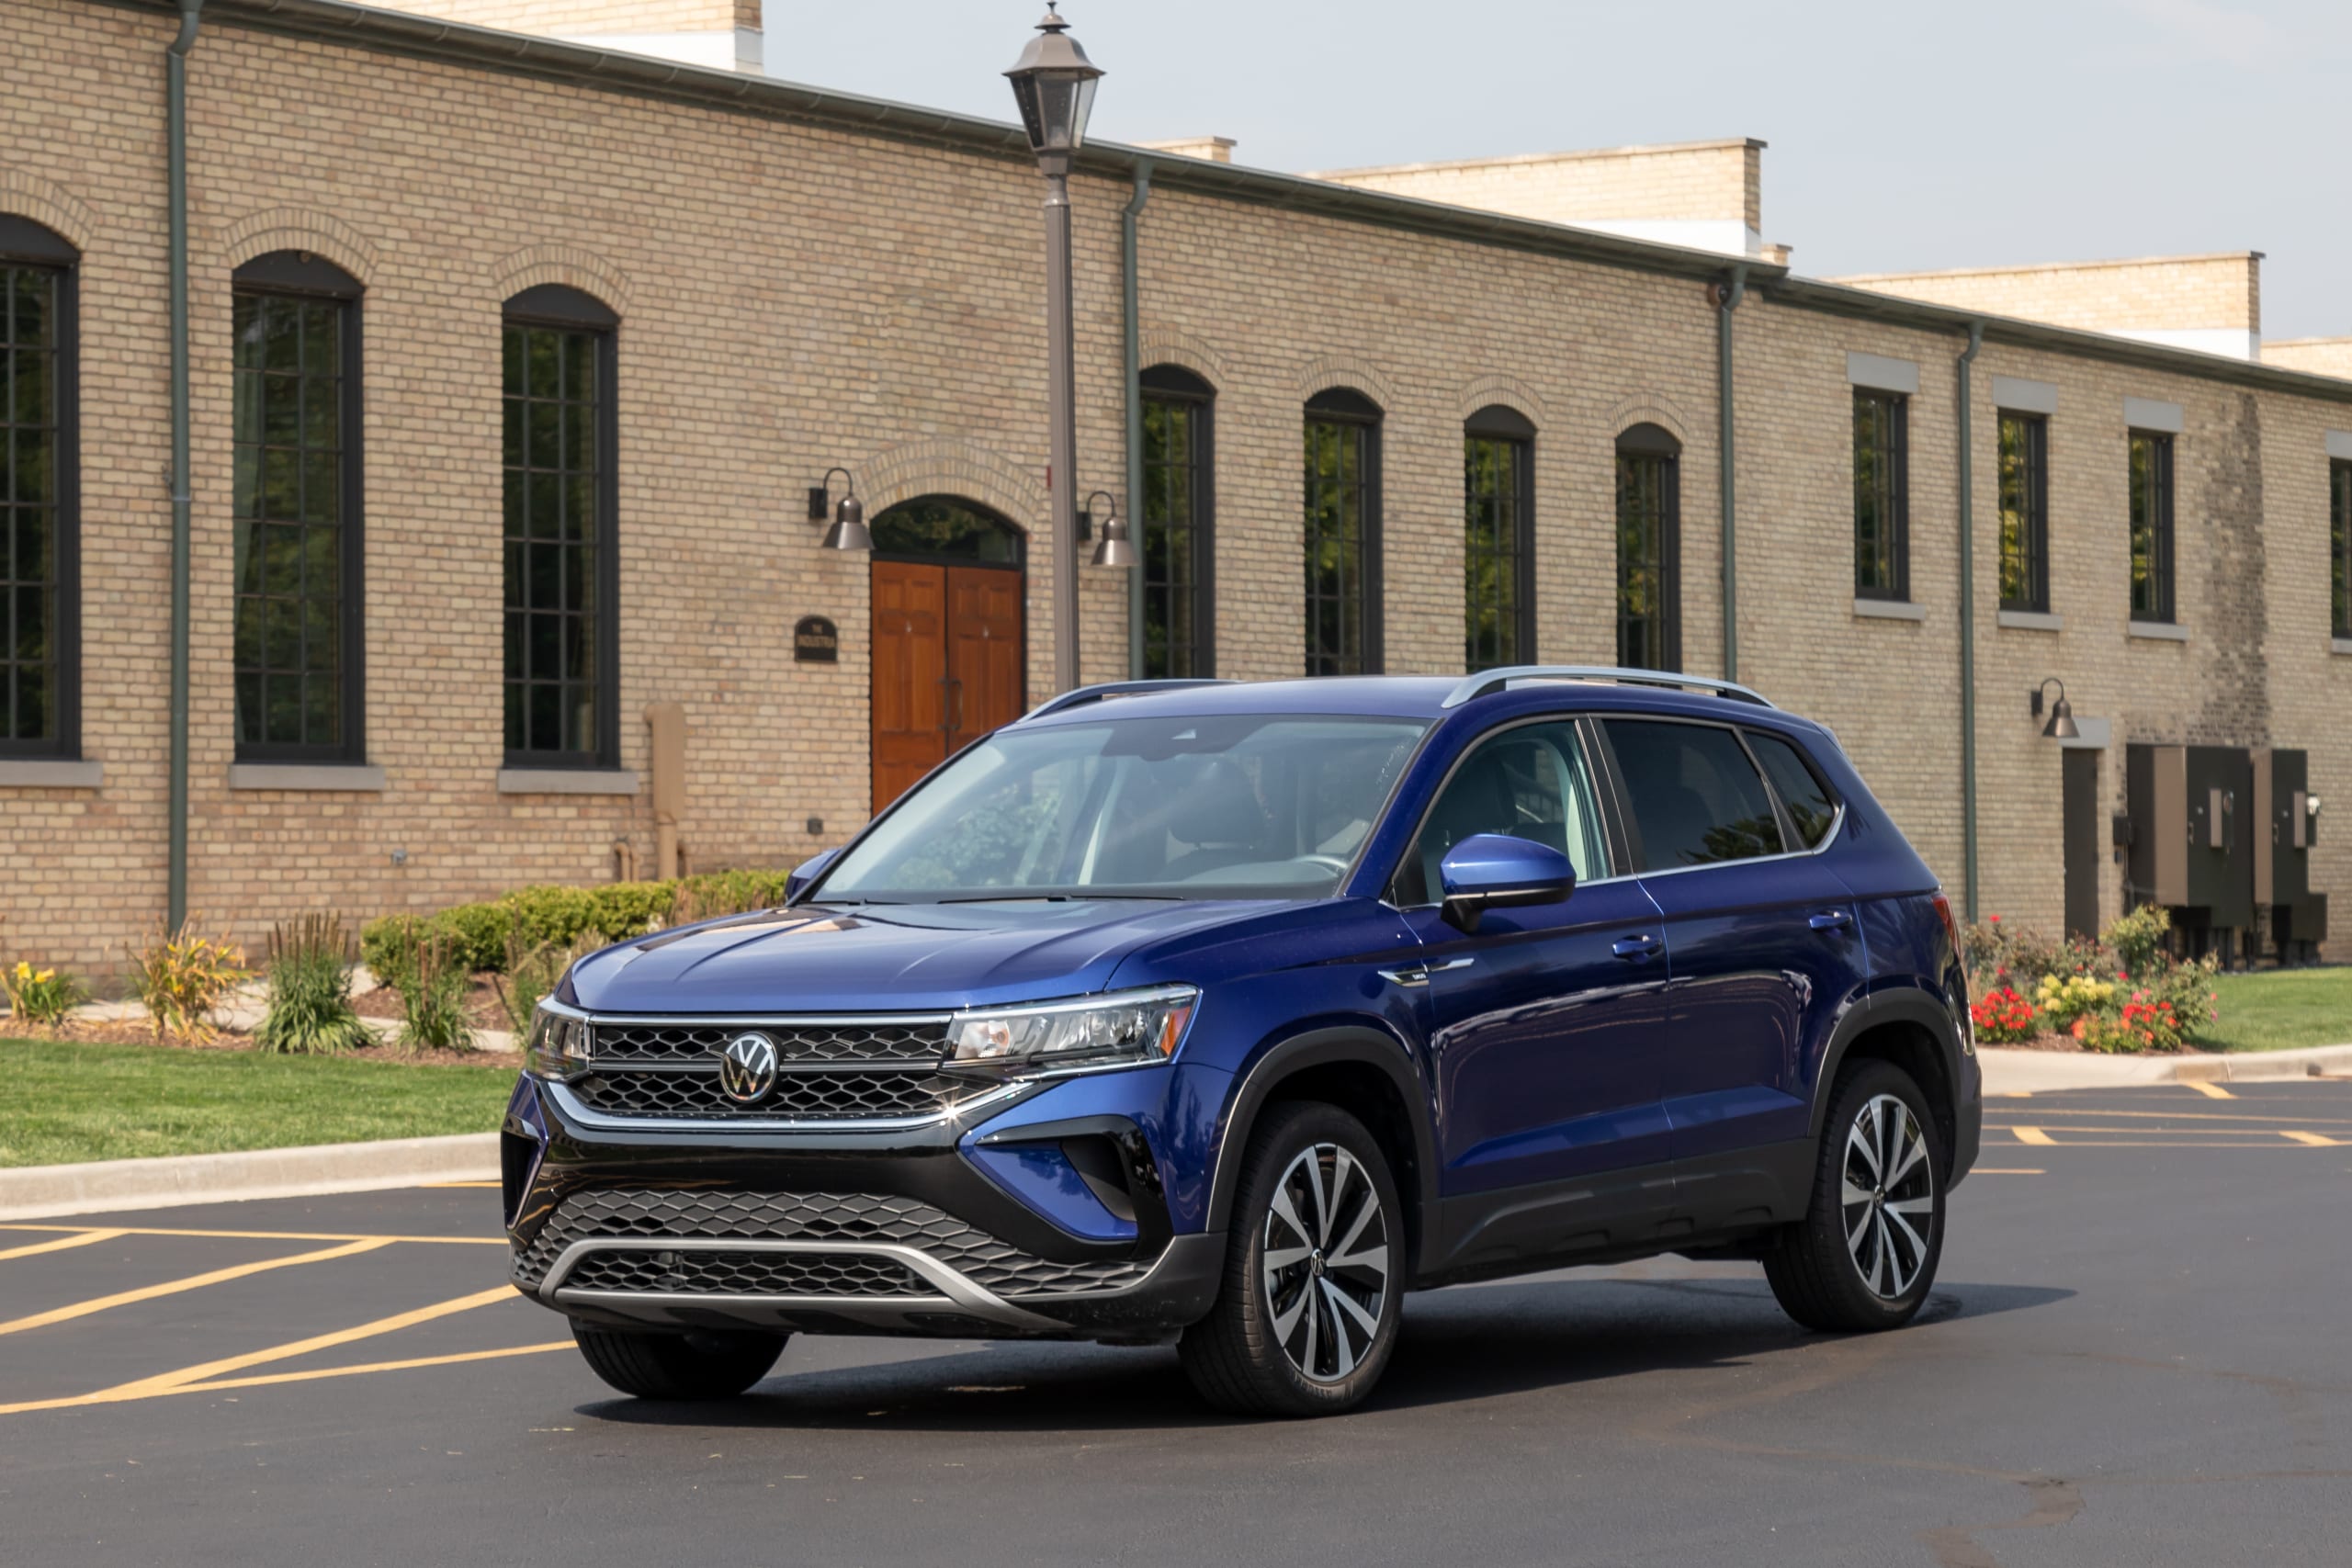 Here Are the 10 Cheapest New SUVs You Can Buy Right Now